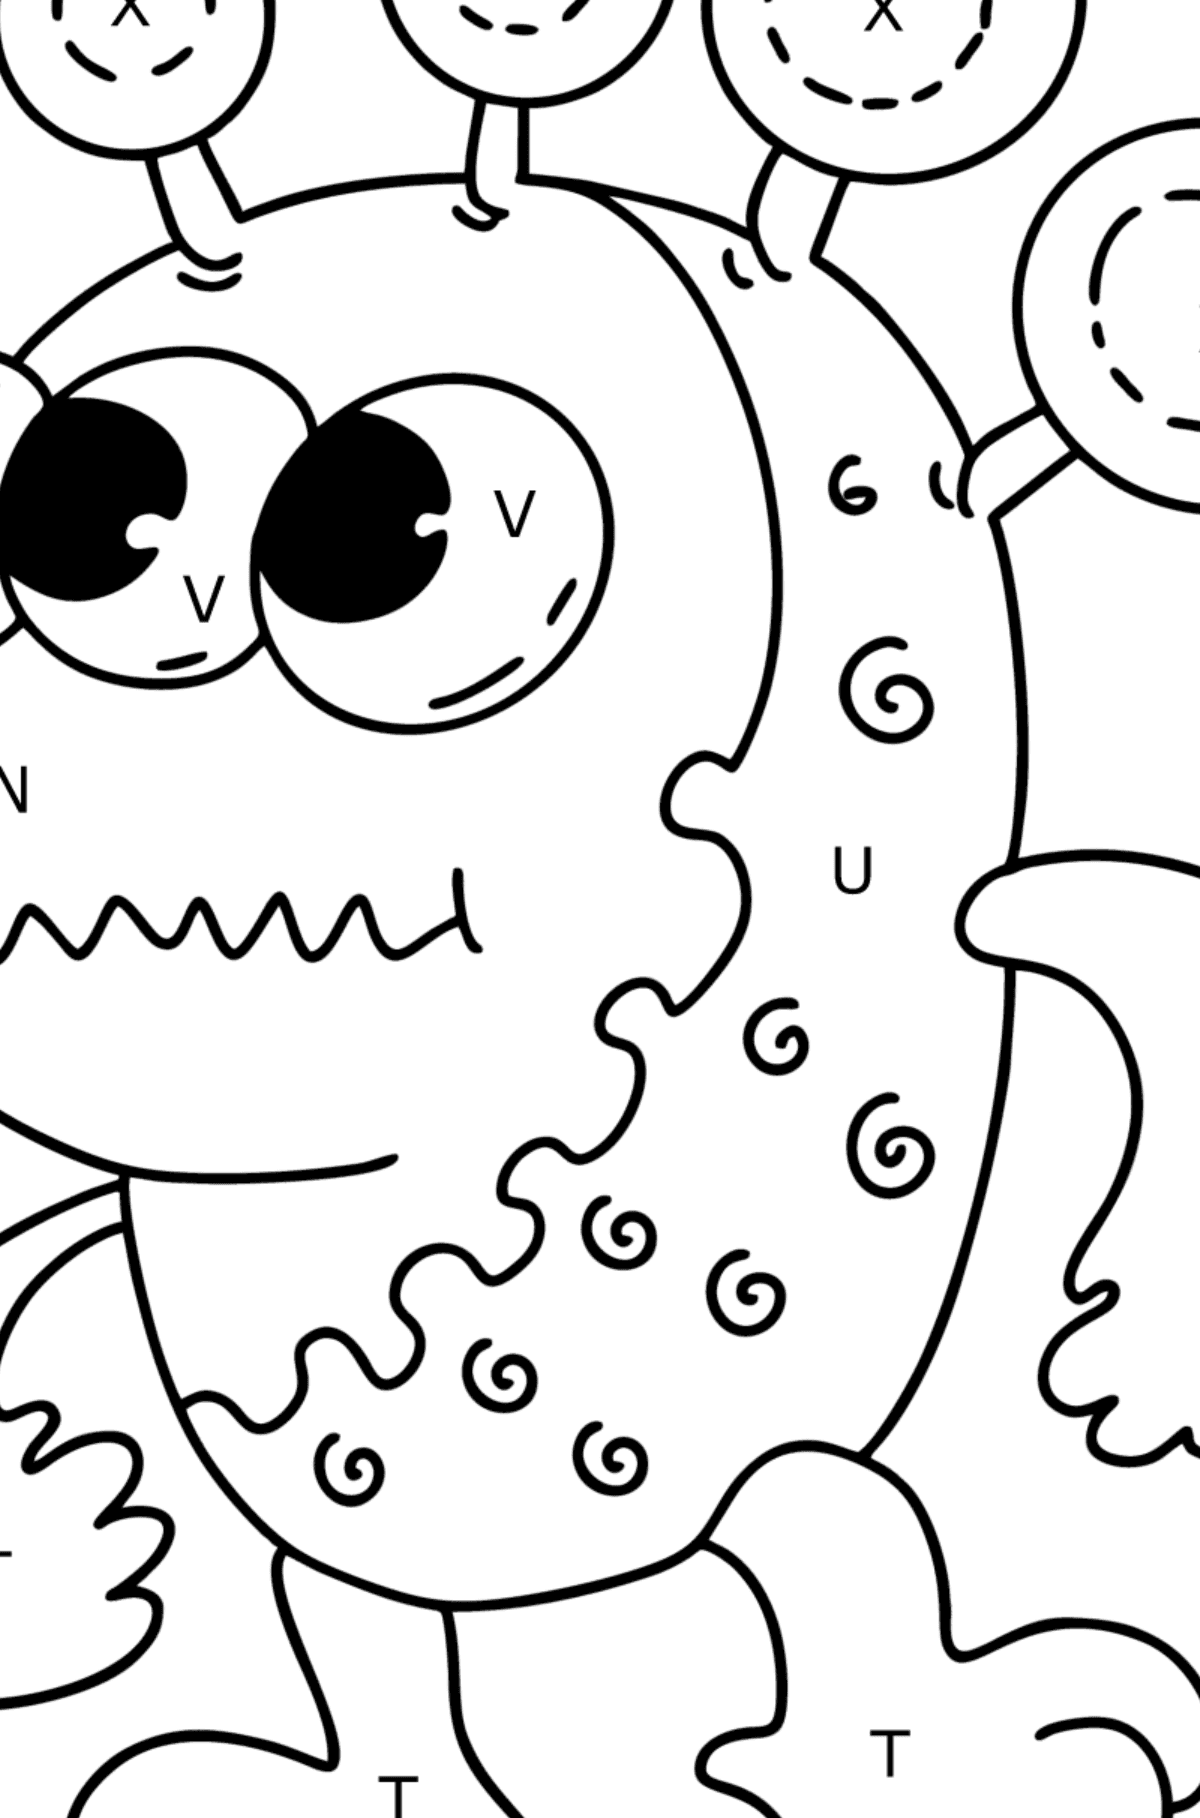 Funny Alien Coloring page - Coloring by Letters for Kids